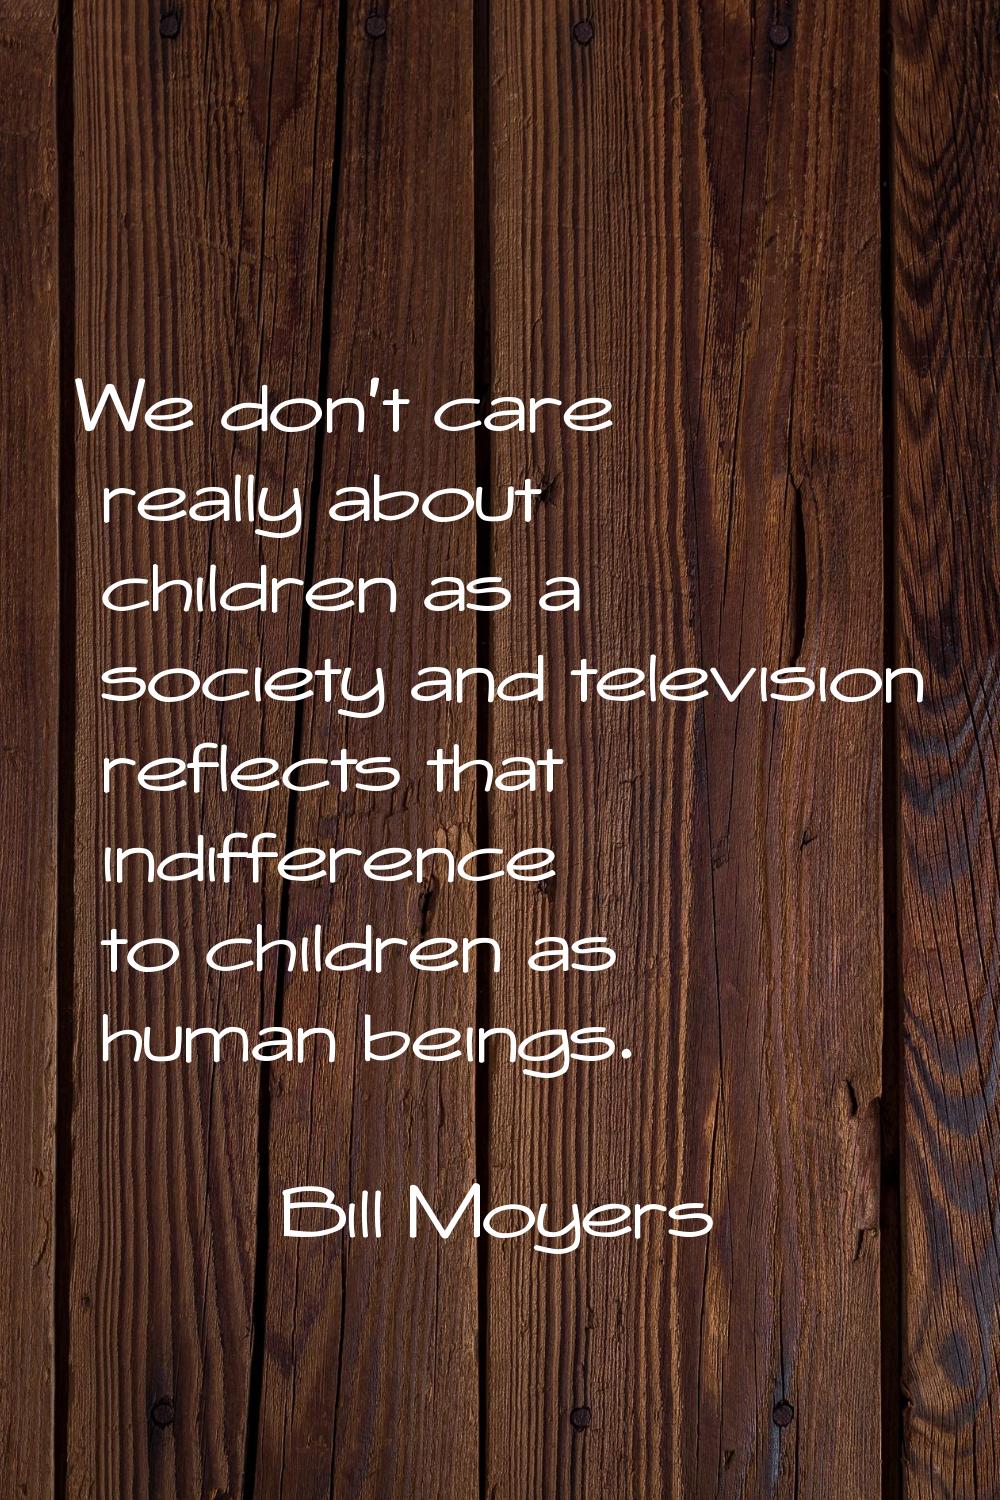 We don't care really about children as a society and television reflects that indifference to child